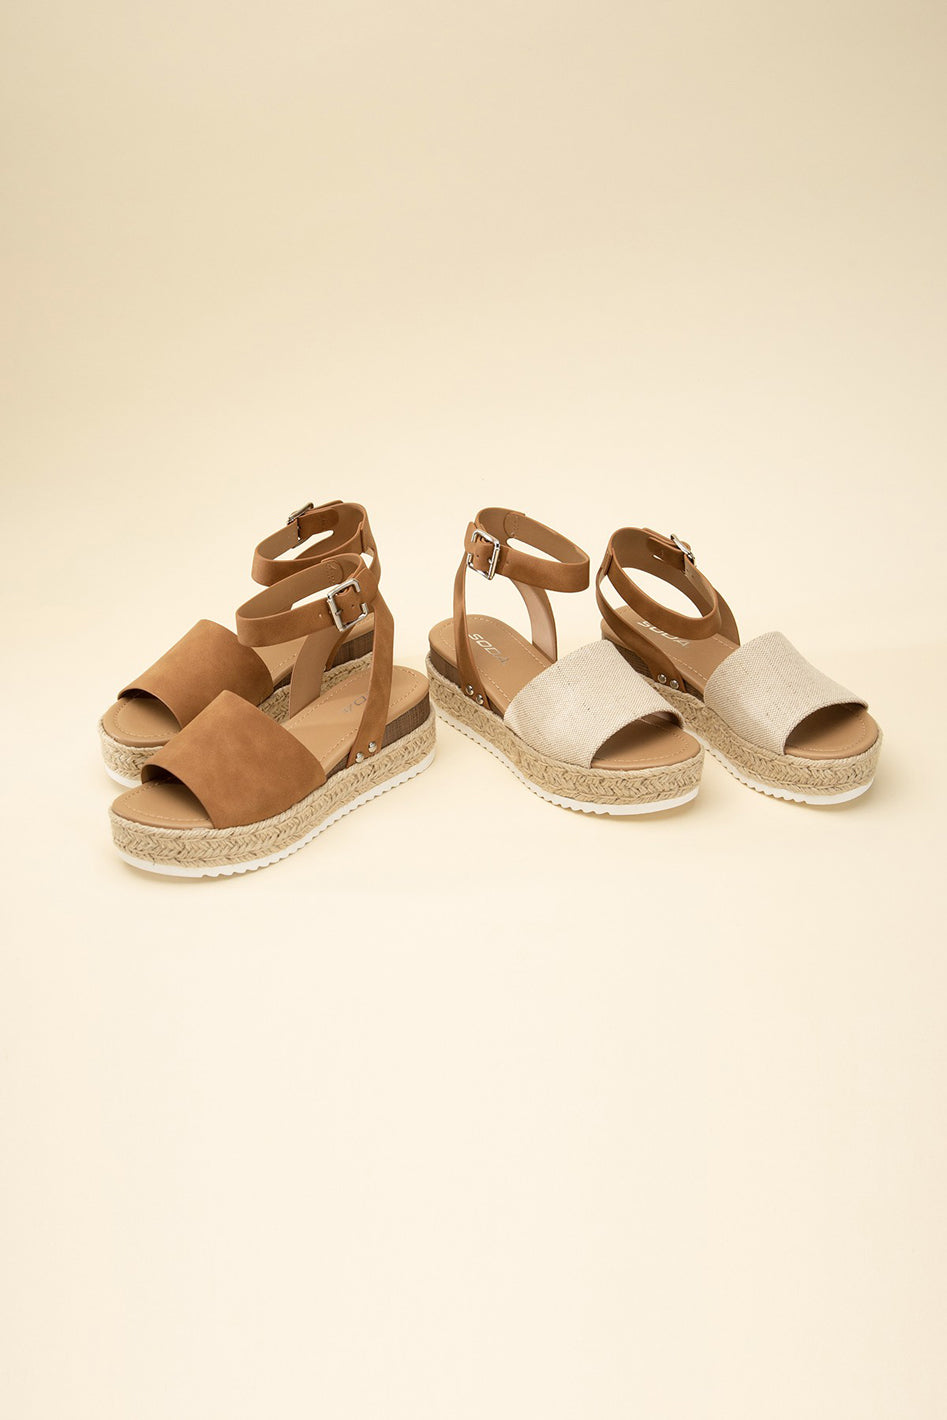 TOPIC-S Espadrille Ankle strap Sandals - Azoroh